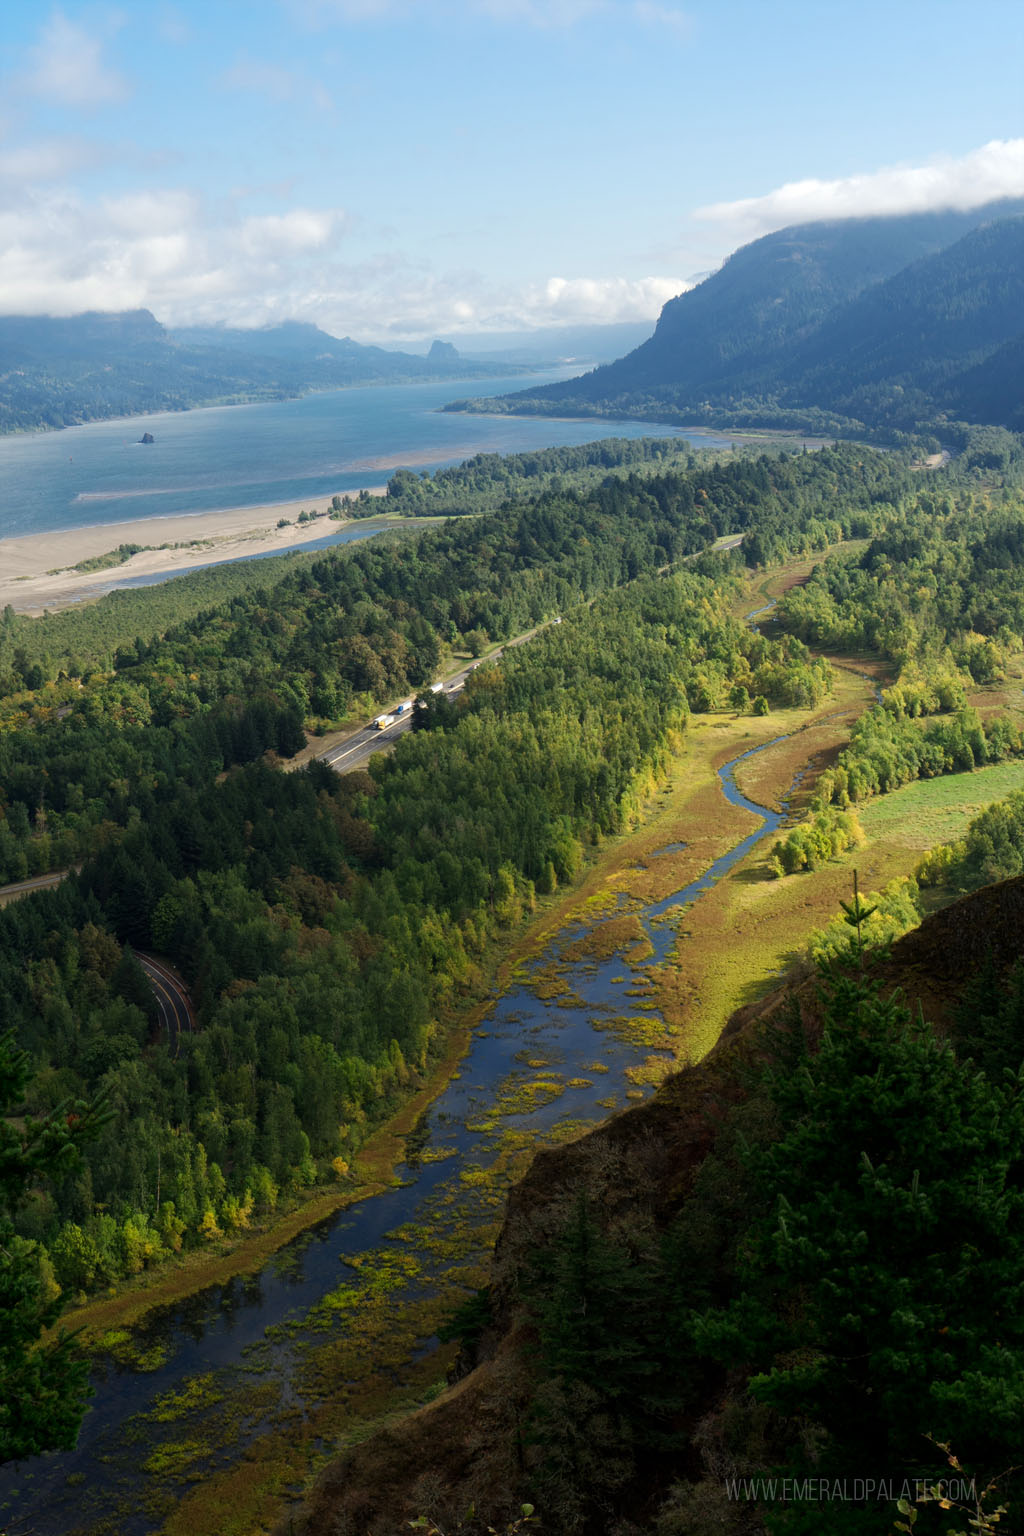 sun shining on the Columbia River and Columbia Gorge landscape